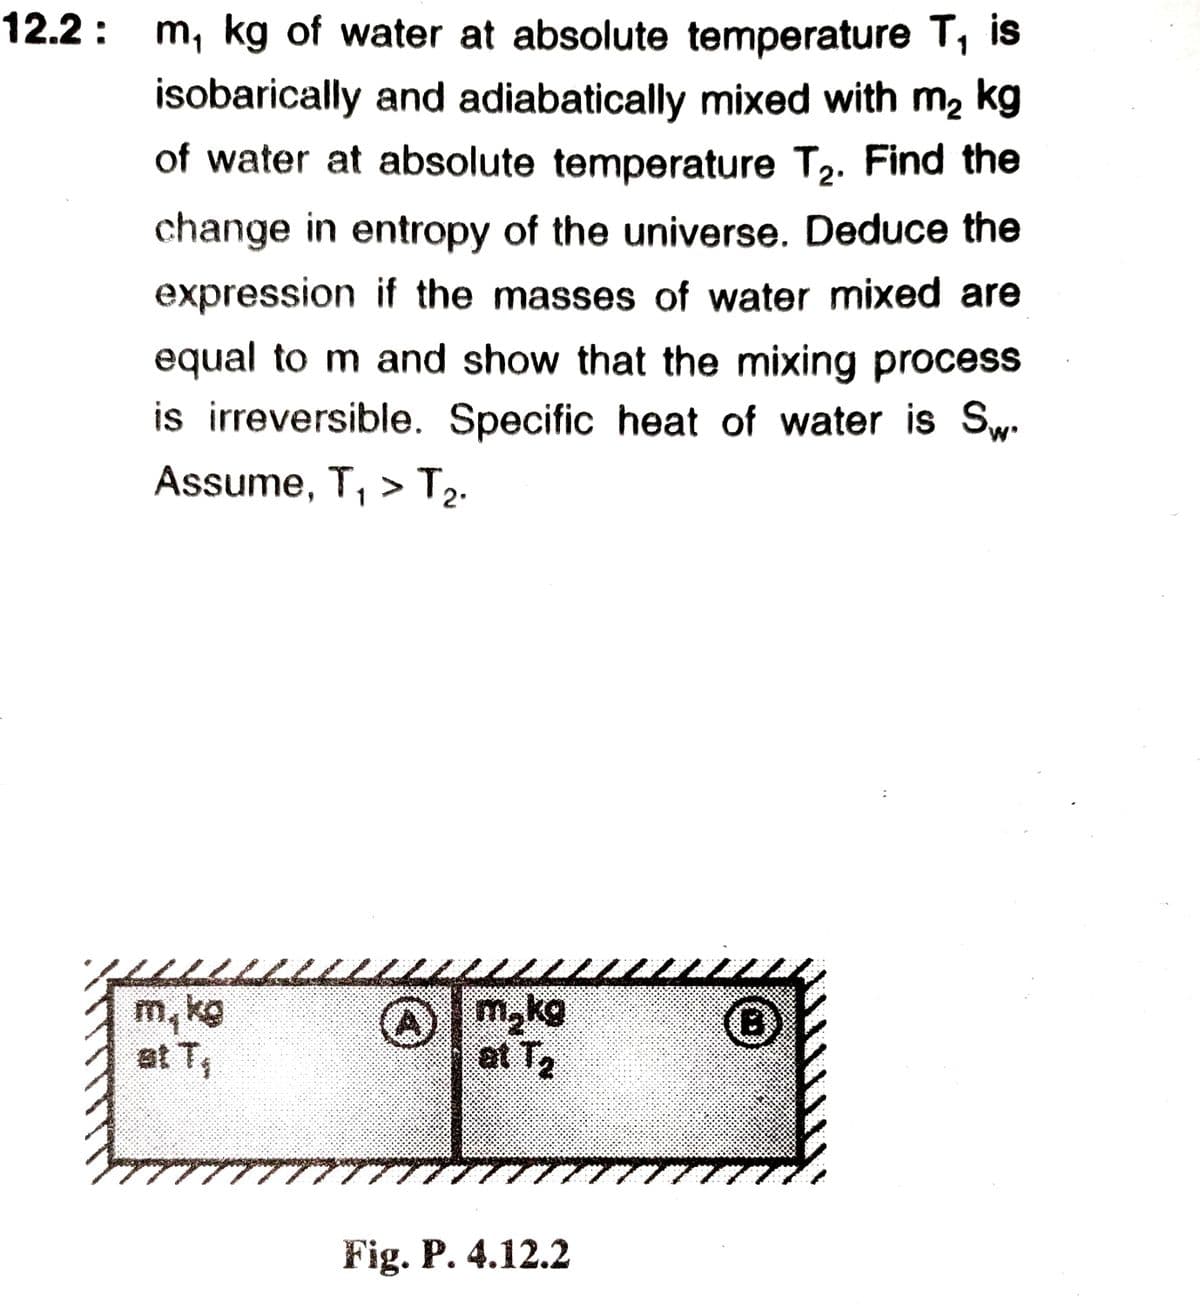 12.2: m, kg of water at absolute temperature T, is
isobarically and adiabatically mixed with m, kg
of water at absolute temperature T2. Find the
change in entropy of the universe. Deduce the
expression if the masses of water mixed are
equal to m and show that the mixing process
is irreversible. Specific heat of water is Sw.
Assume, T, >T2.
m, kg
at T
m,kg
at T2
(B)
Fig. P. 4.12.2
